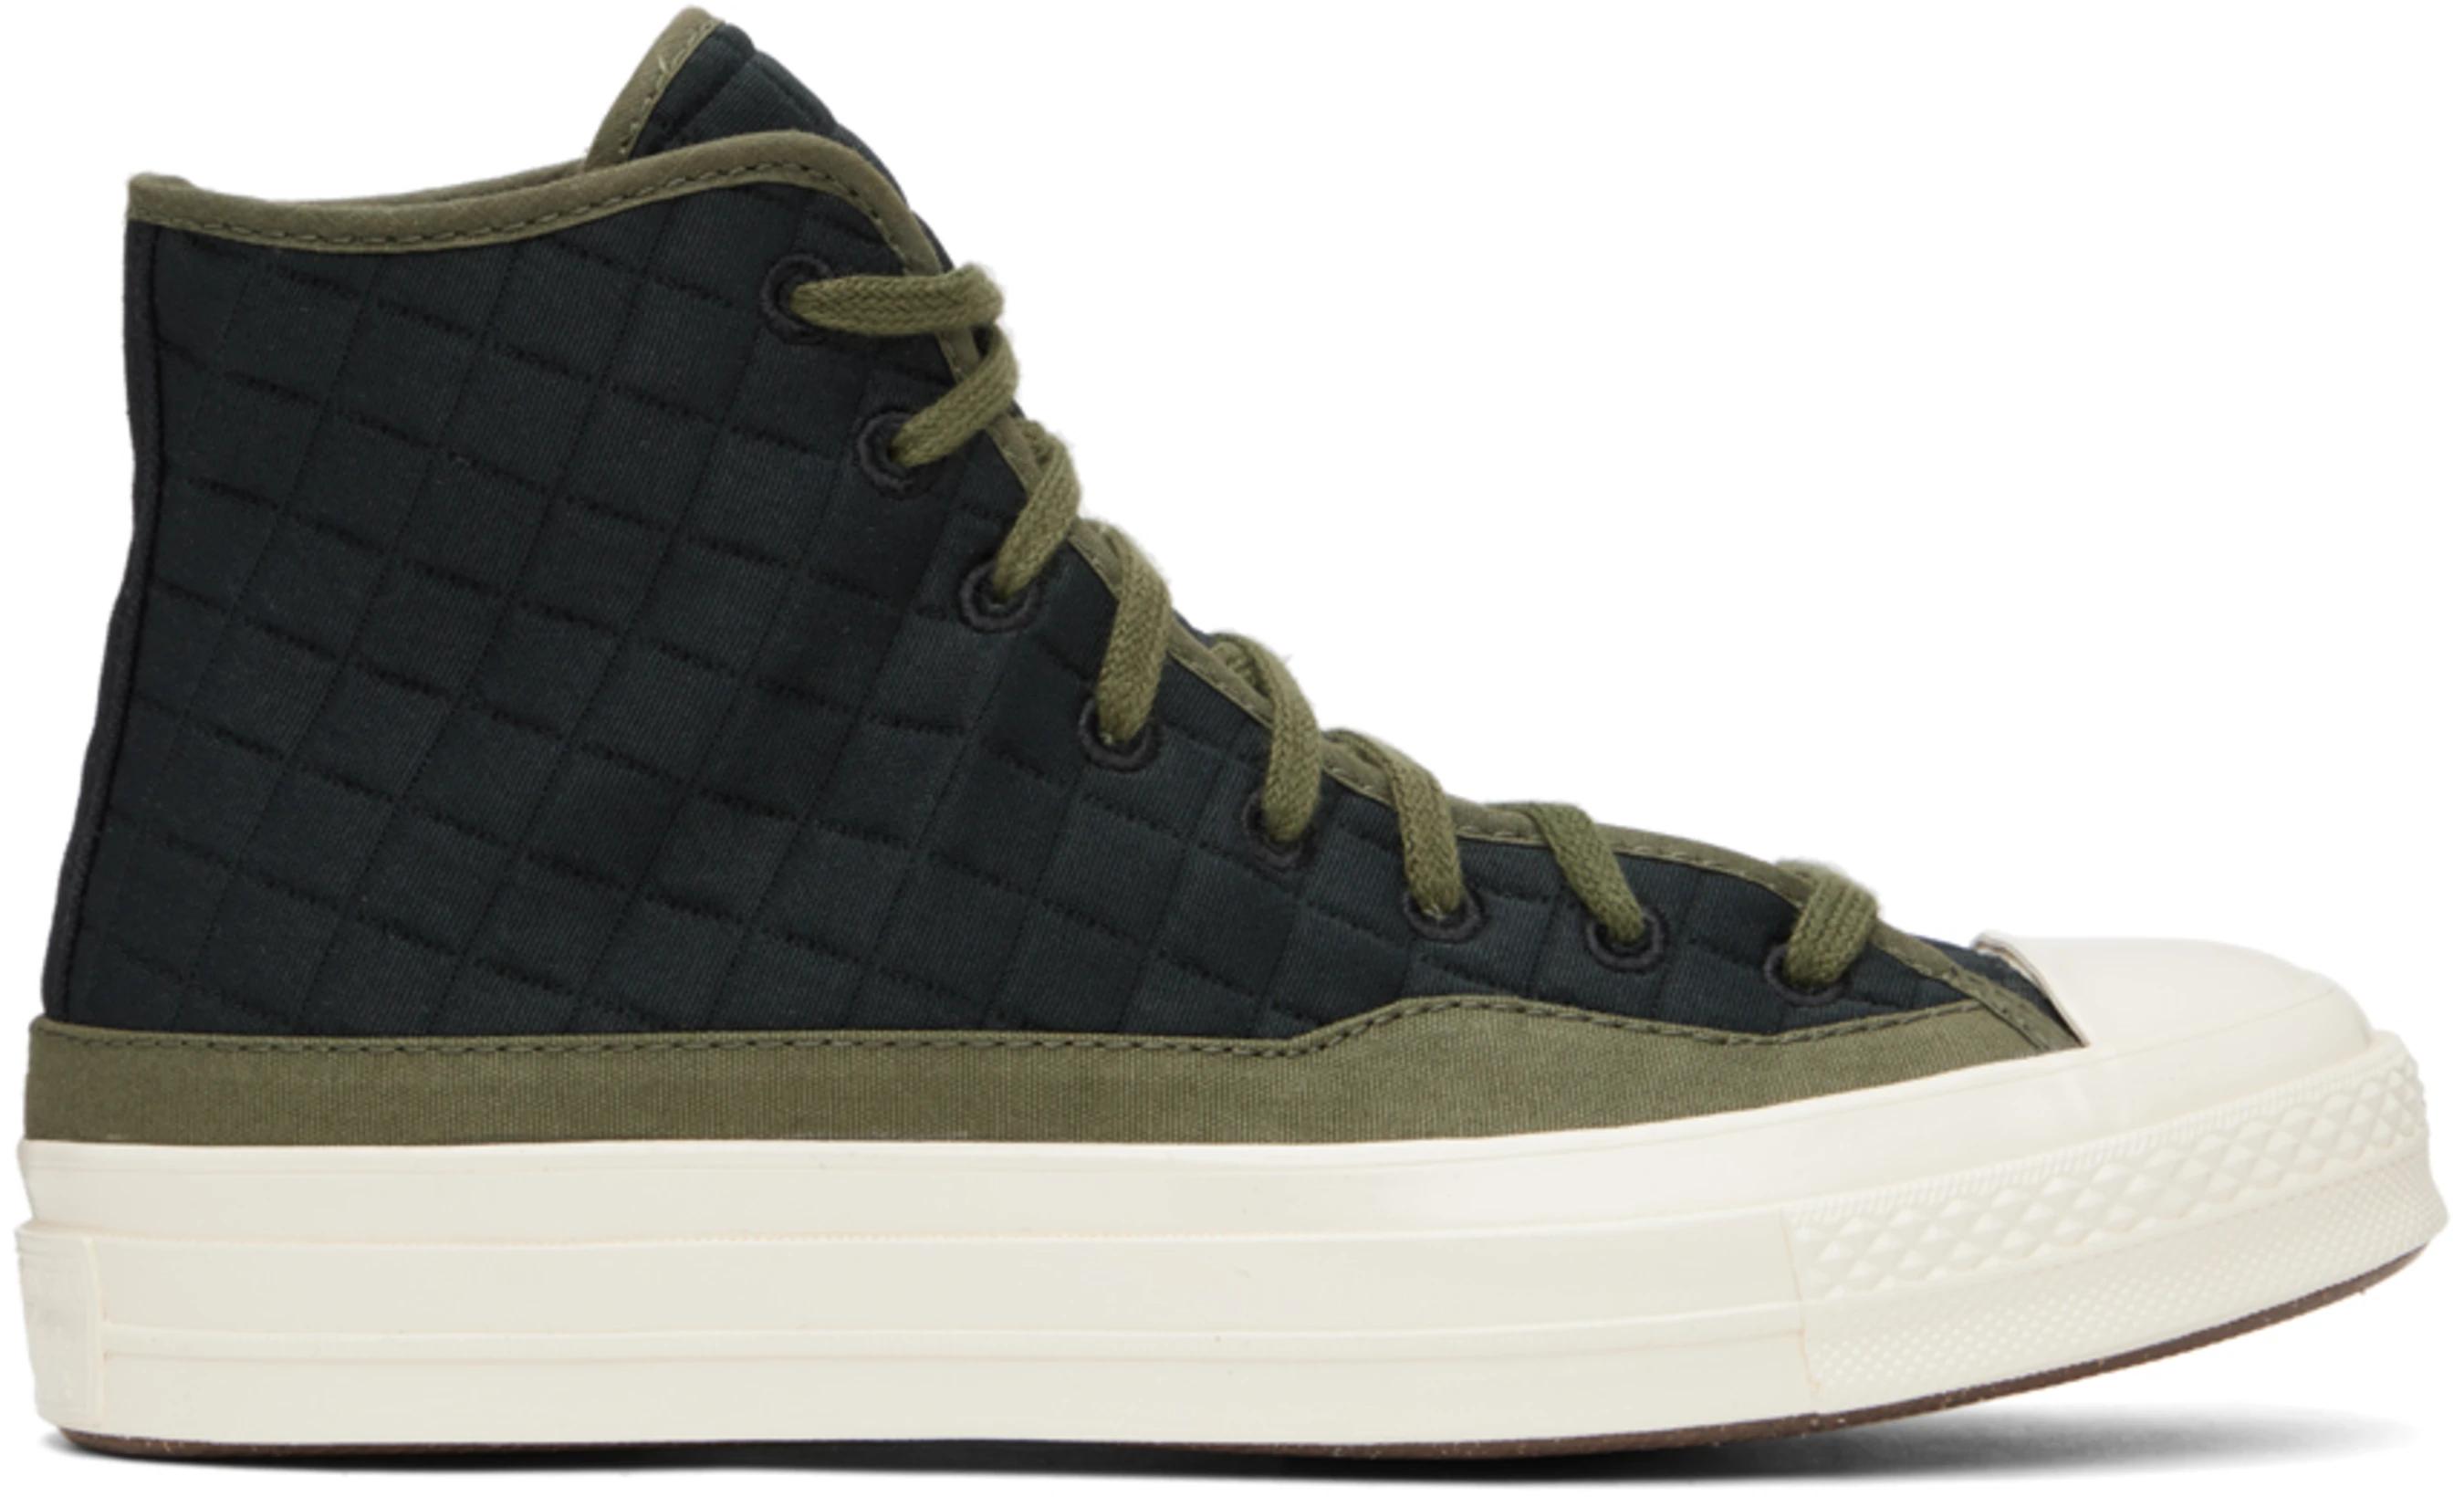 Black & Green Chuck 70 Sneakers by CONVERSE